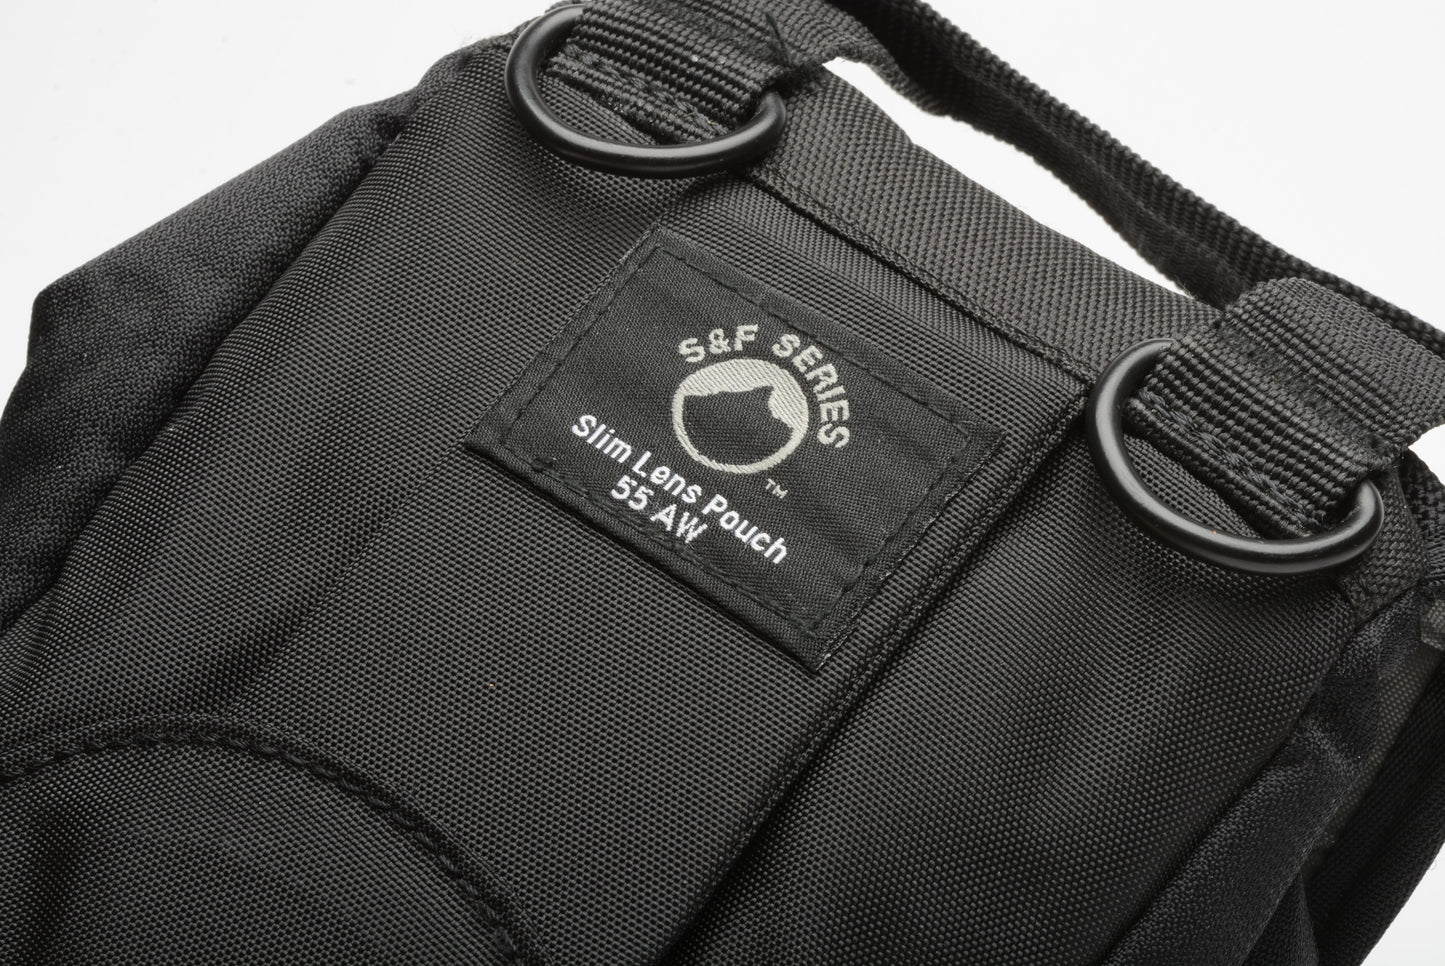 Lowepro S&F Series Slim Lens Pouch 55AW, very clean